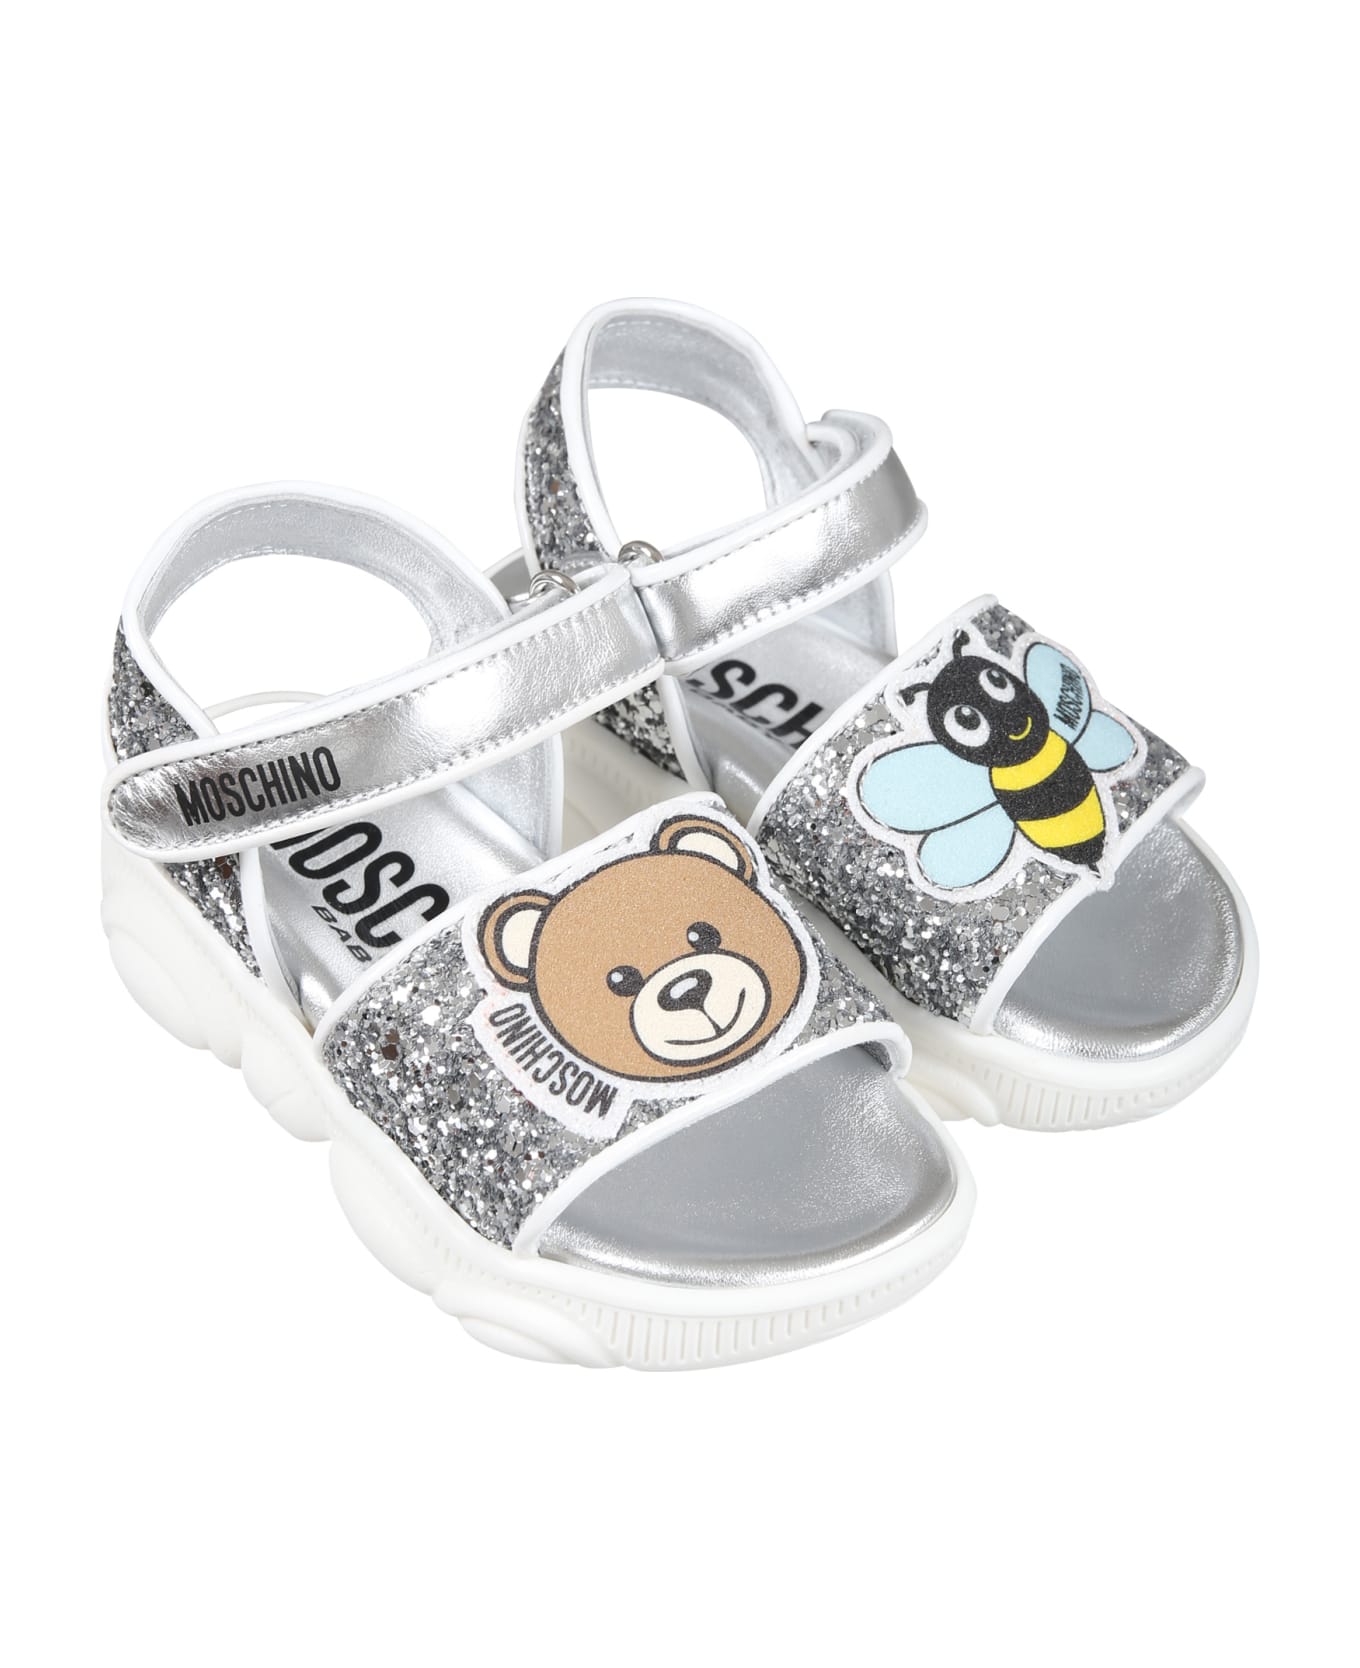 Moschino Silver Sandals For Girl With Teddy Bear, Bee And Logo - Silver